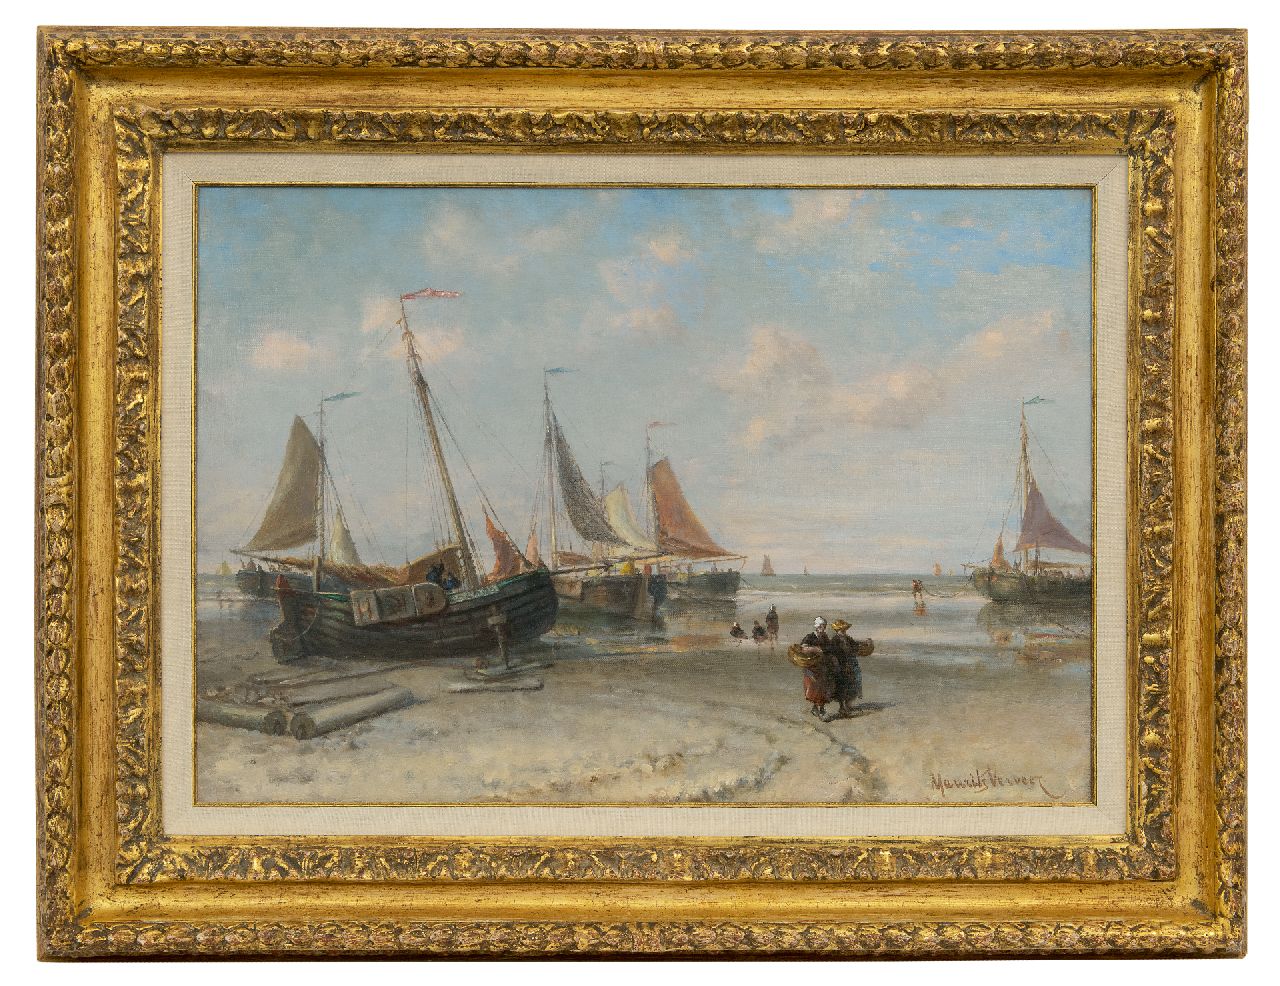 Verveer M.L.  | Mozes Leonardus 'Maurits' Verveer | Paintings offered for sale | Fishermen's wives near the fishing boats along the coastline, oil on canvas 38.8 x 54.9 cm, signed l.r. and on the reverse